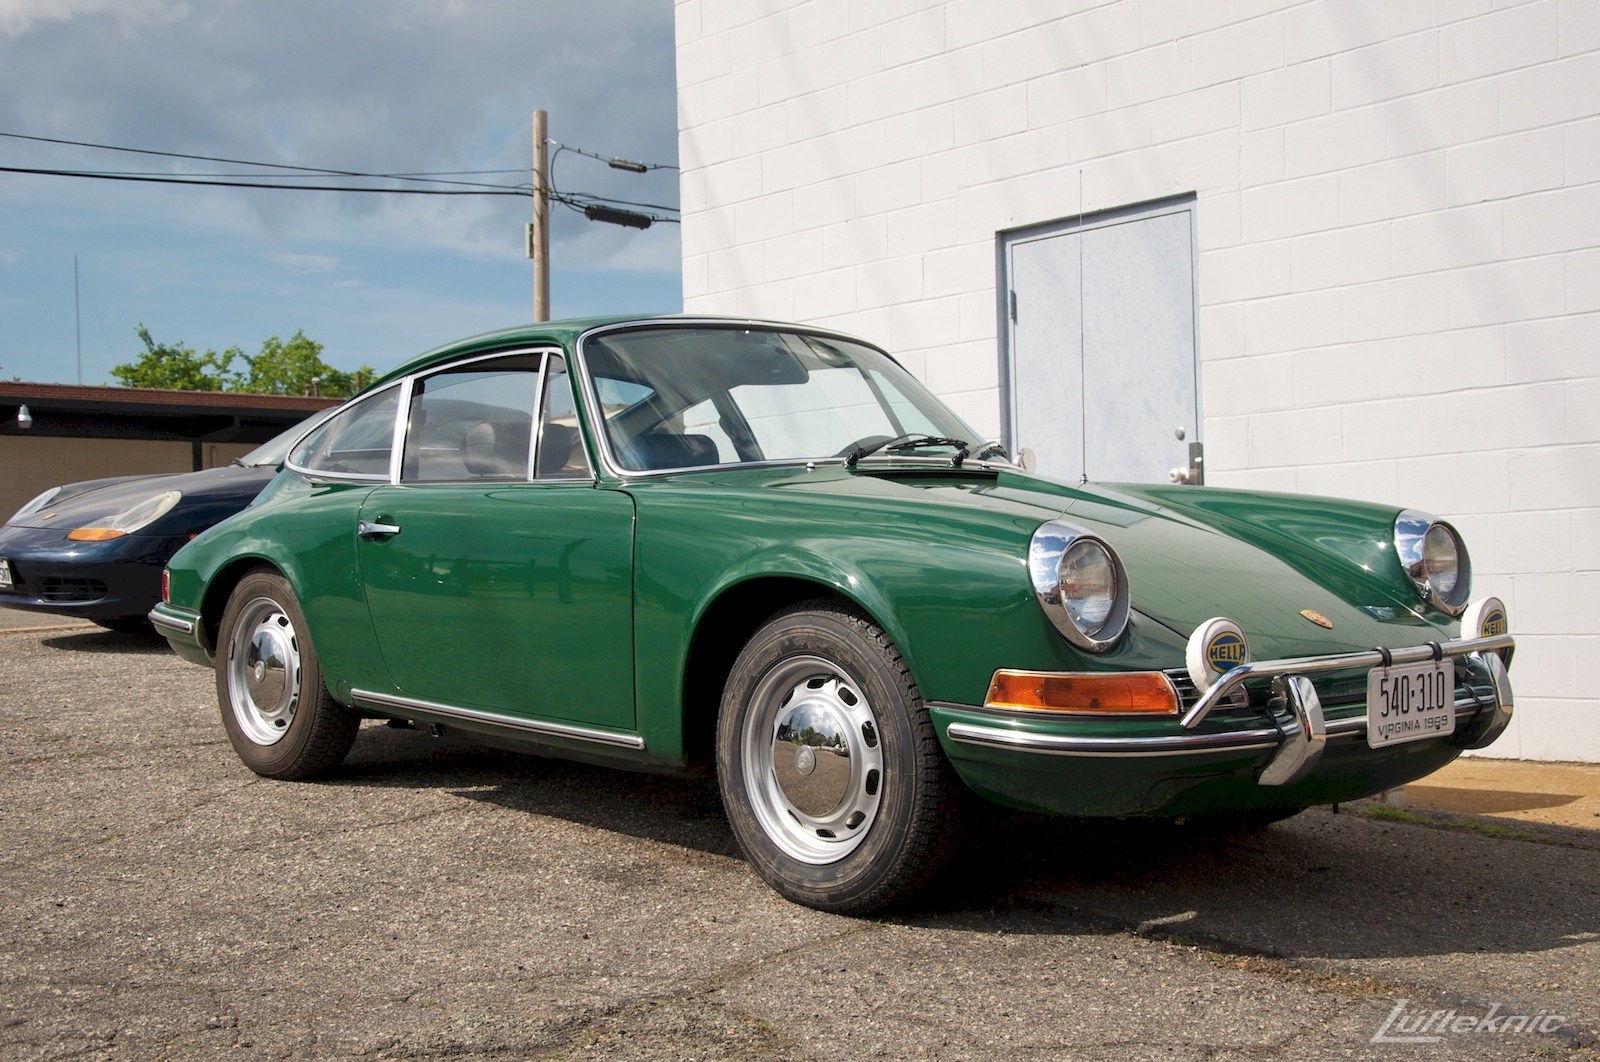 An Irish Green Porsche 912 which has been completely restored by Lufteknic sitting in the shop parking lot.